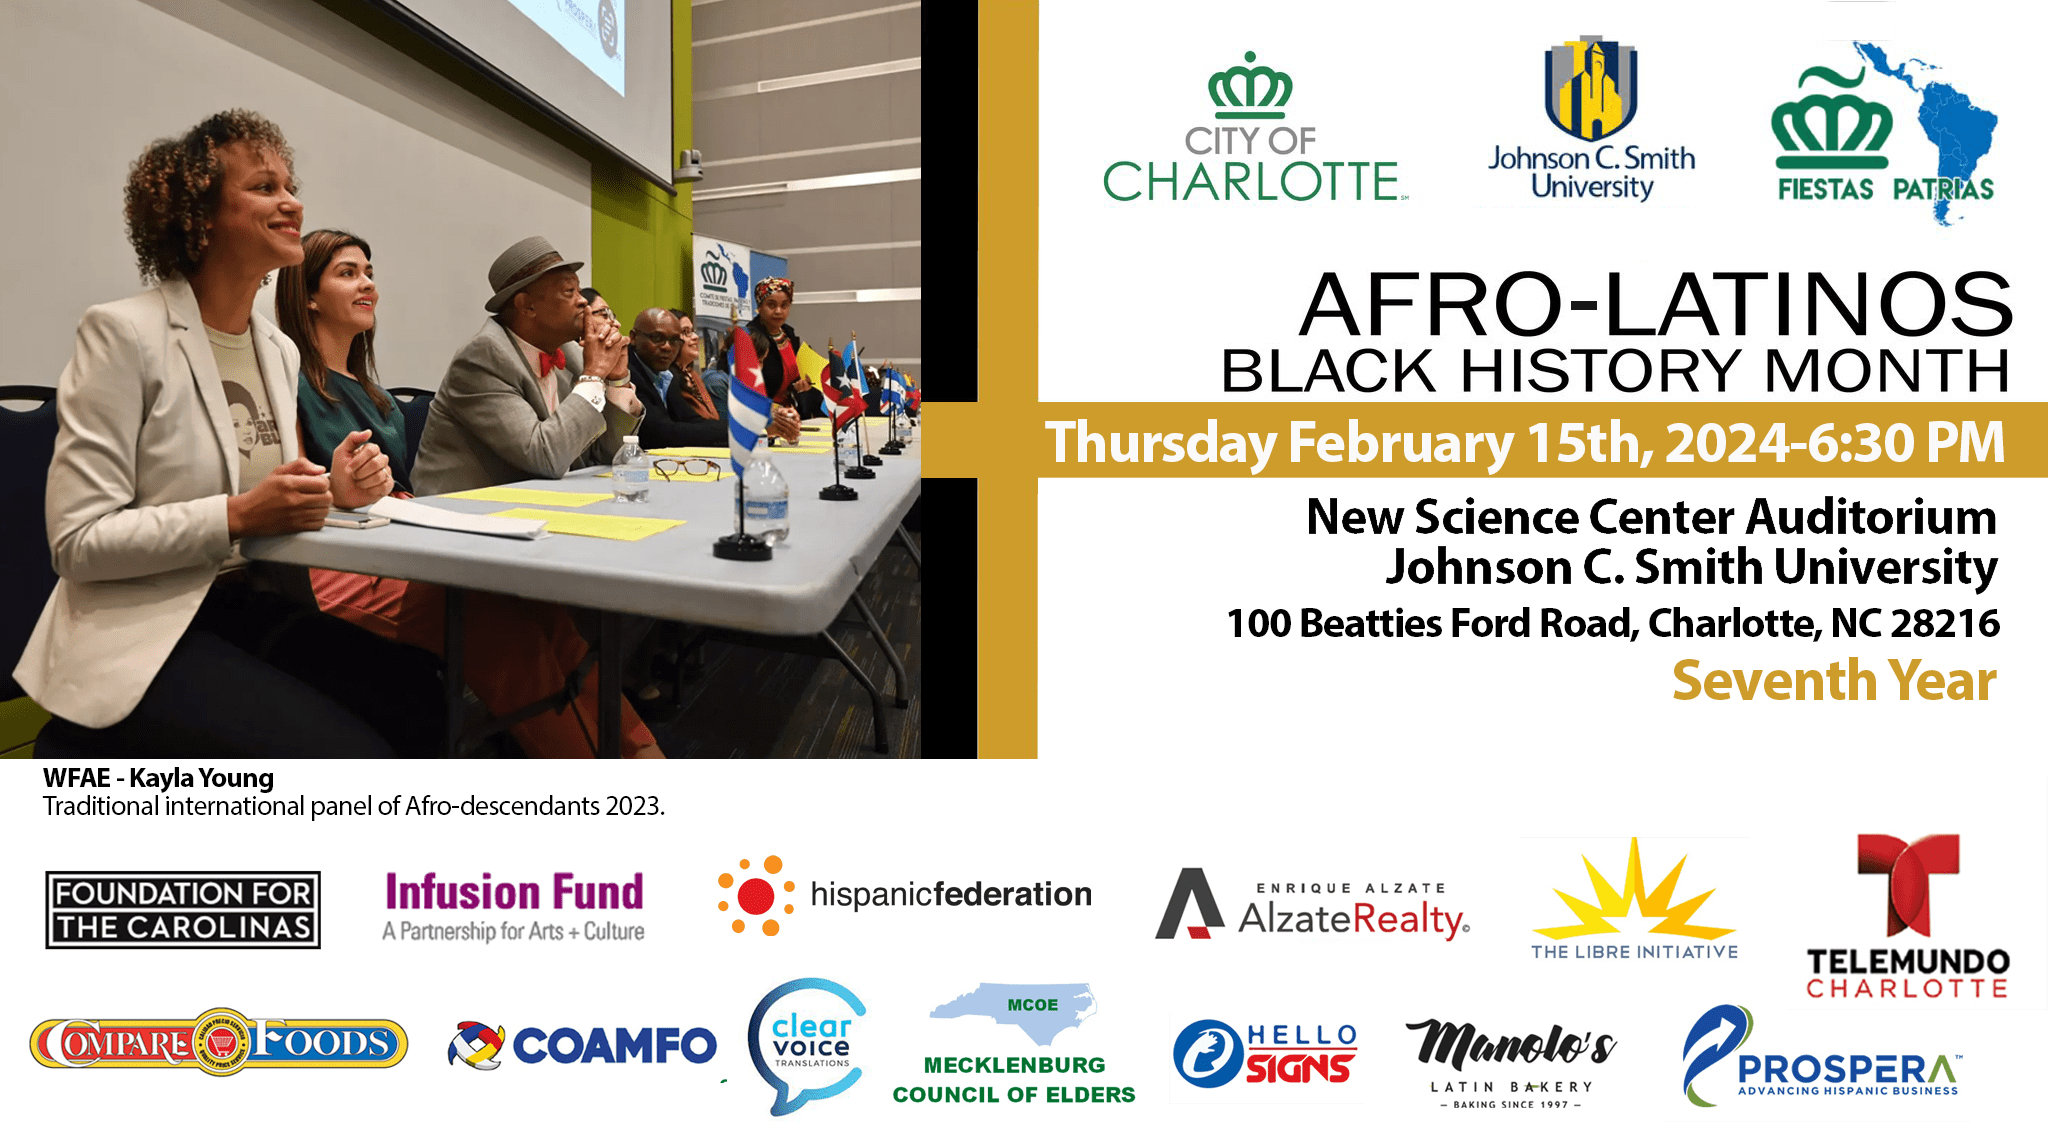 Charlotte's Patriotic Celebrations and Traditions Committee (Fiestas Patrias) (CFPTC), the City of Charlotte, Johnson C. Smith University (JCSU), and the Mecklenburg Council of Elders (MCOE) will commemorate in Charlotte Afro-Latinos Black History Month.